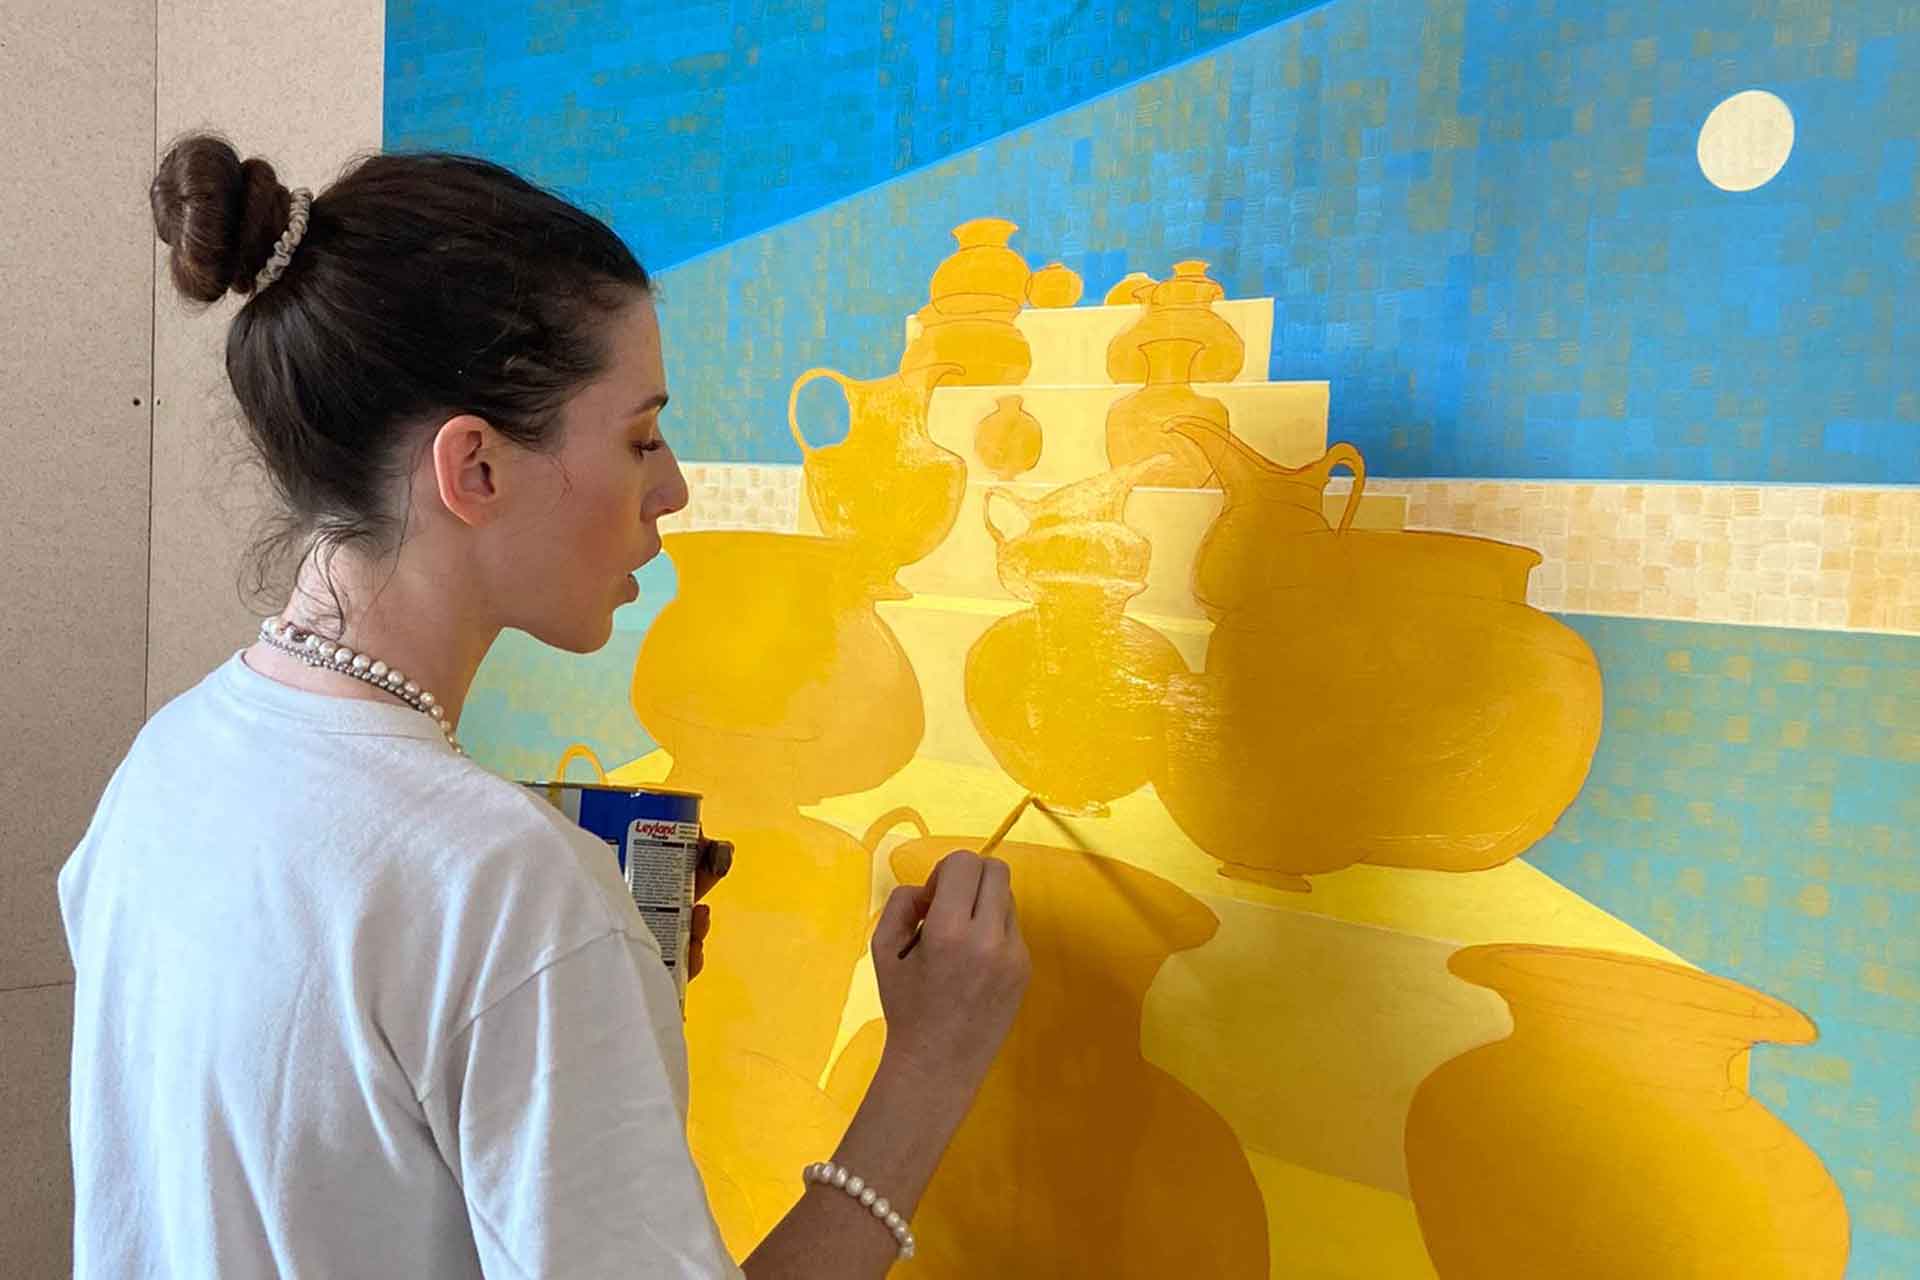 Artist painting on a blue and yellow canvas